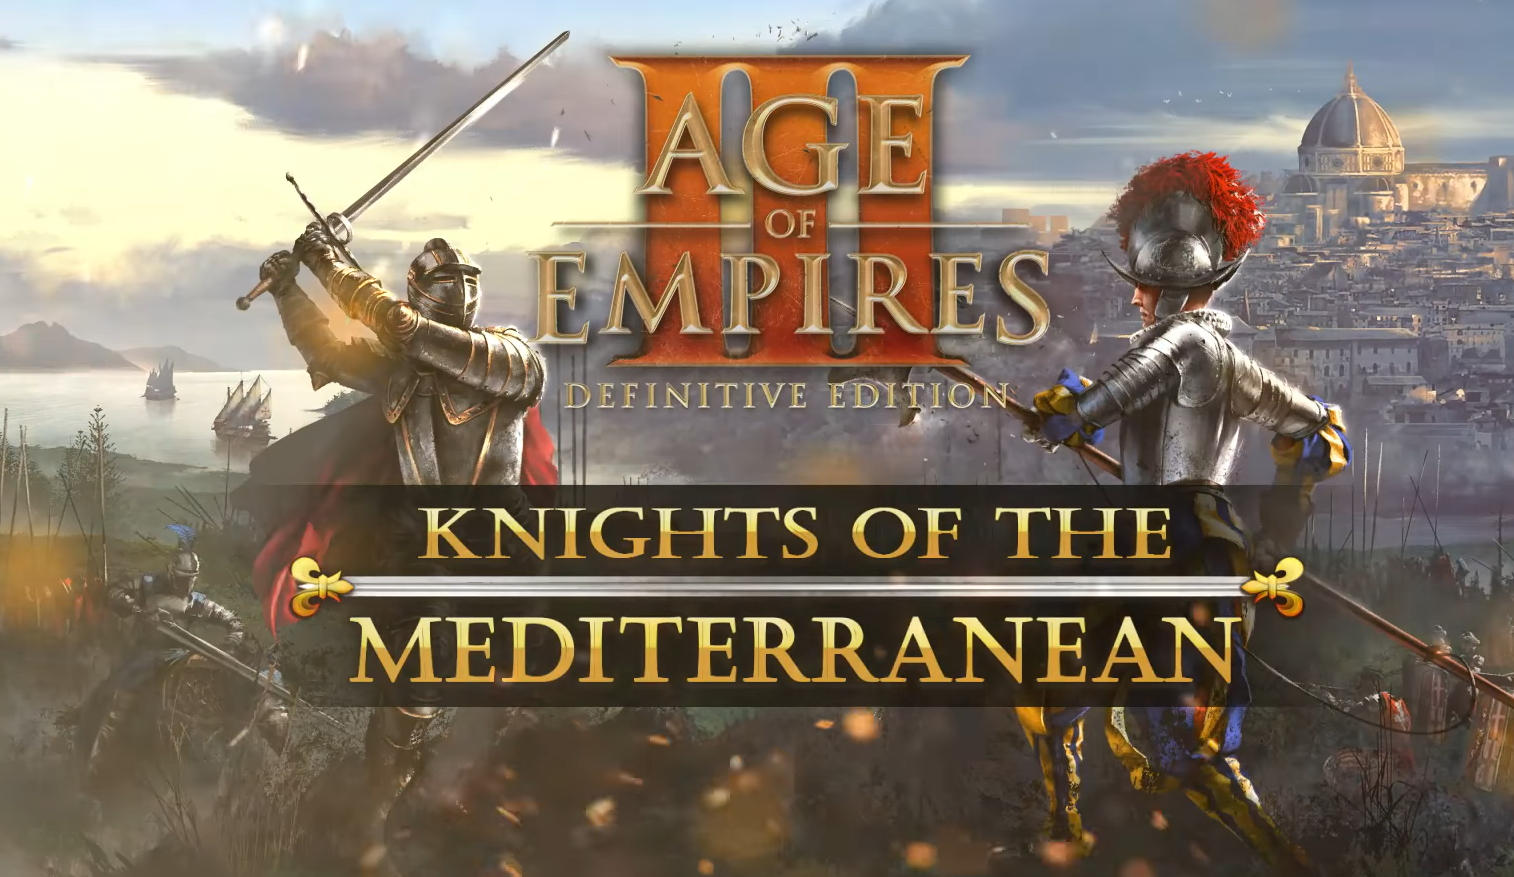 download free age of empires iii definitive edition knights of the mediterranean